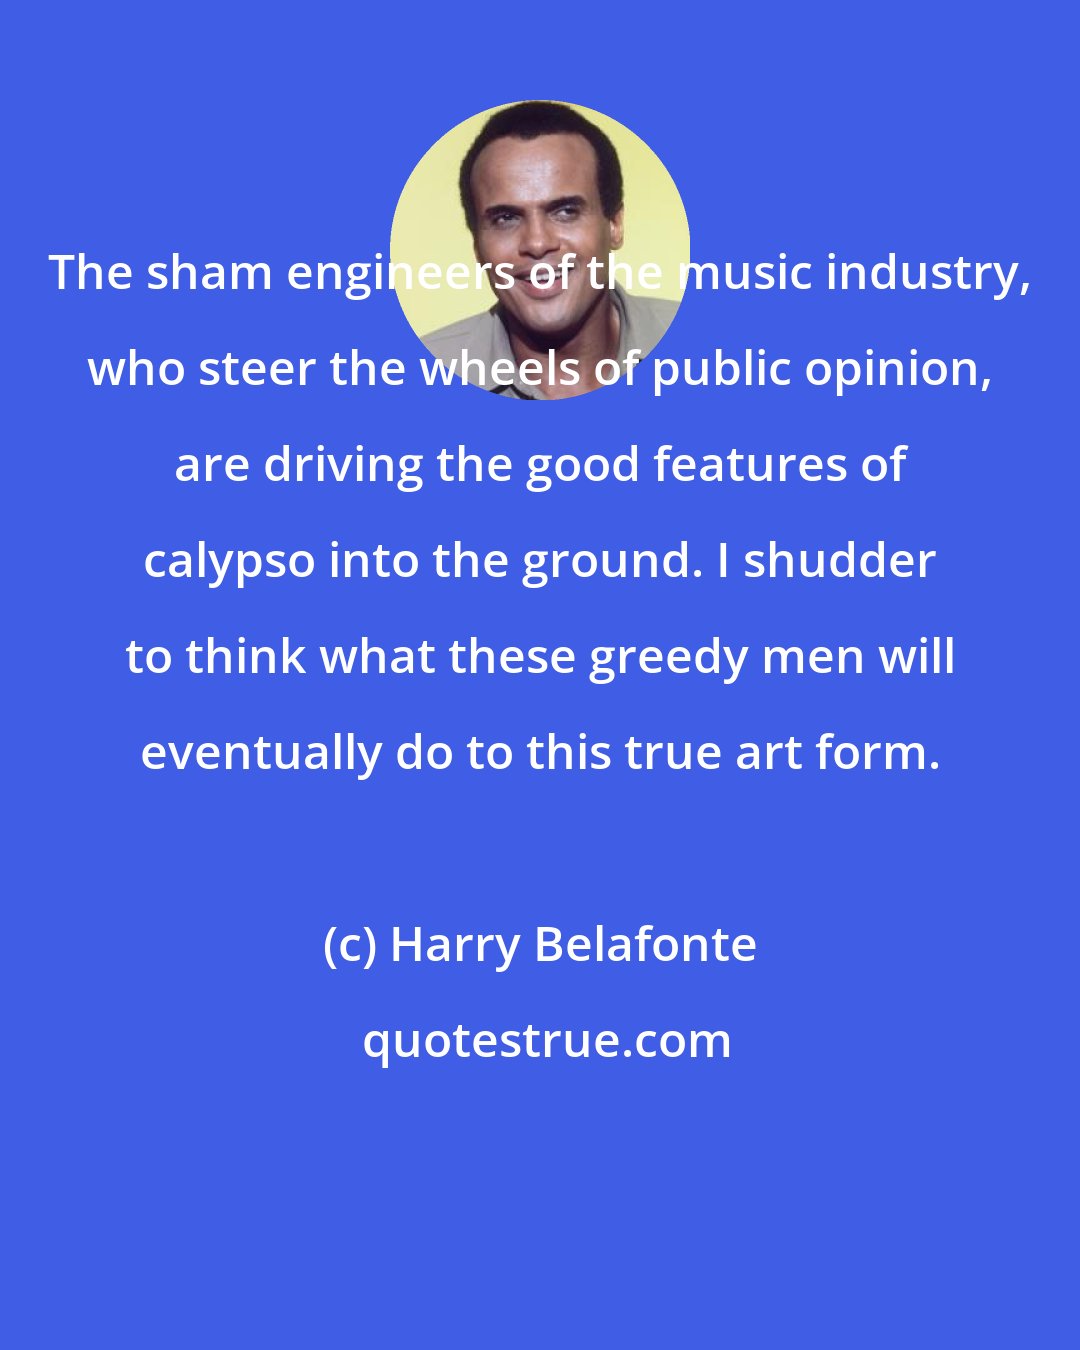 Harry Belafonte: The sham engineers of the music industry, who steer the wheels of public opinion, are driving the good features of calypso into the ground. I shudder to think what these greedy men will eventually do to this true art form.